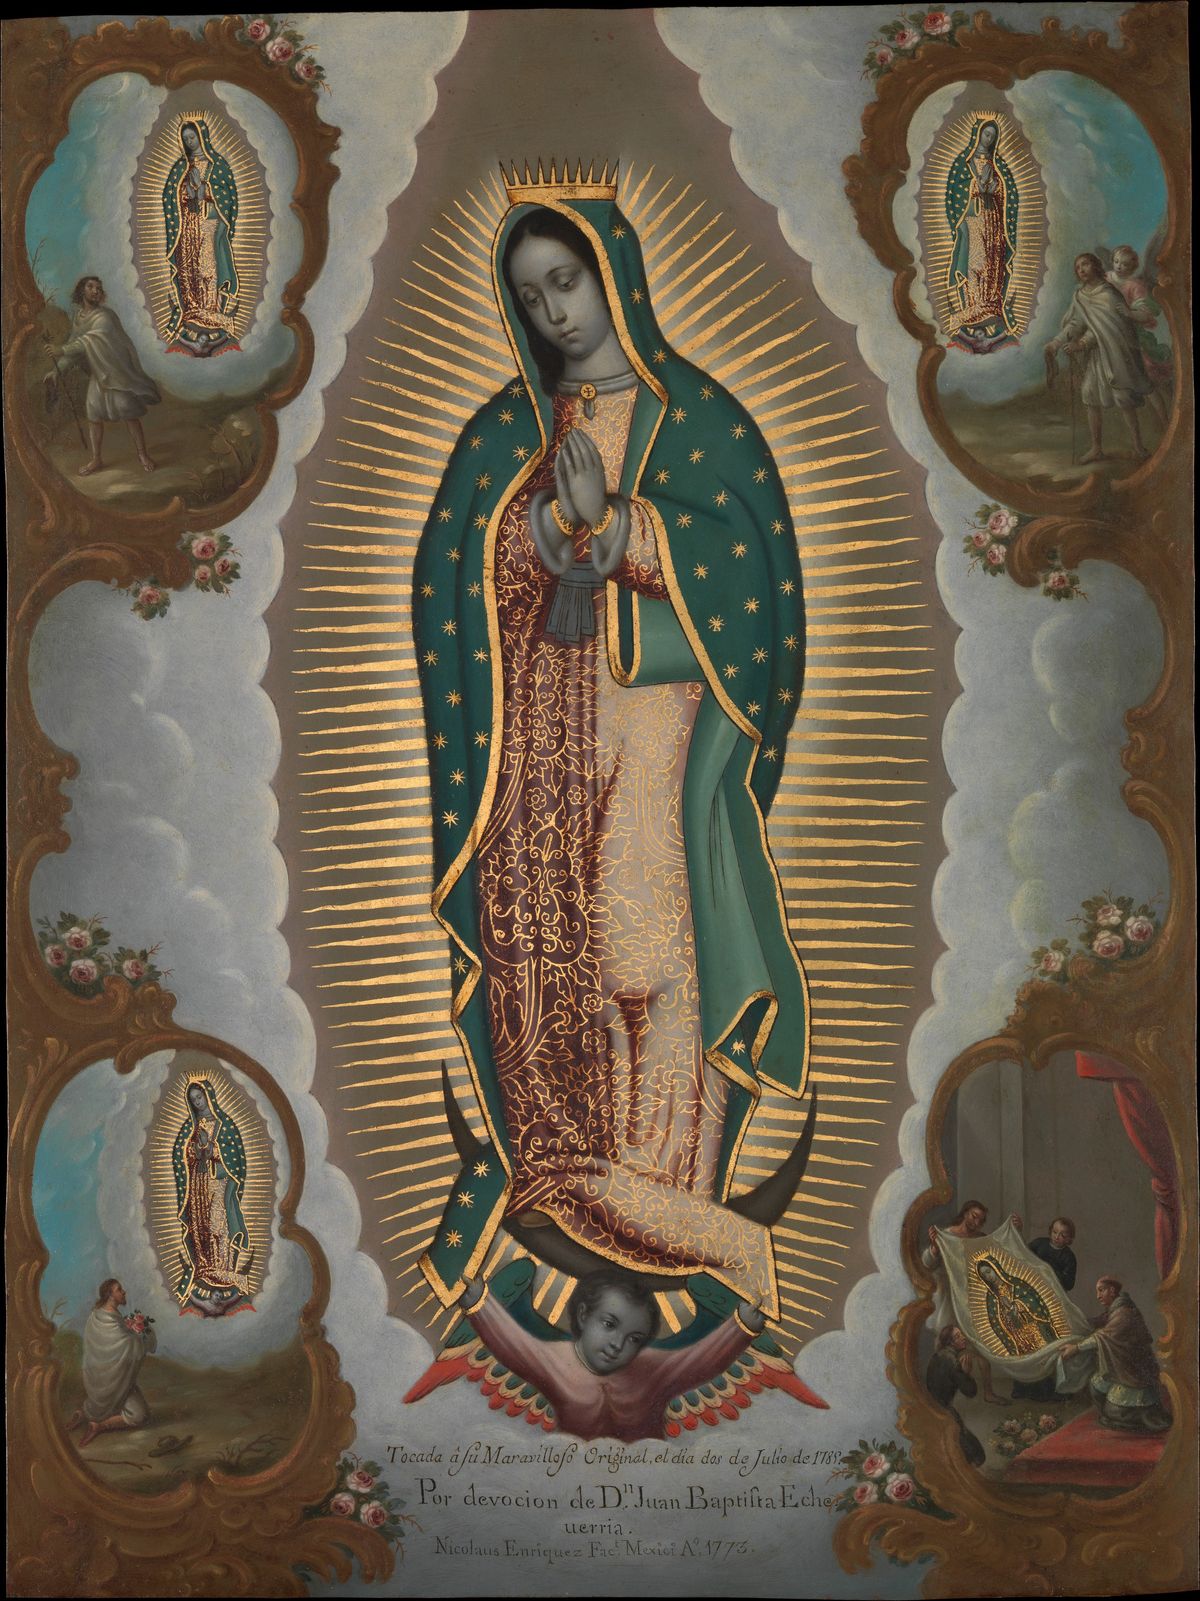 The Virgin of Guadalupe with the Four Apparitions (1773) by Nicolás Enríquez - Public Domain Catholic Painting